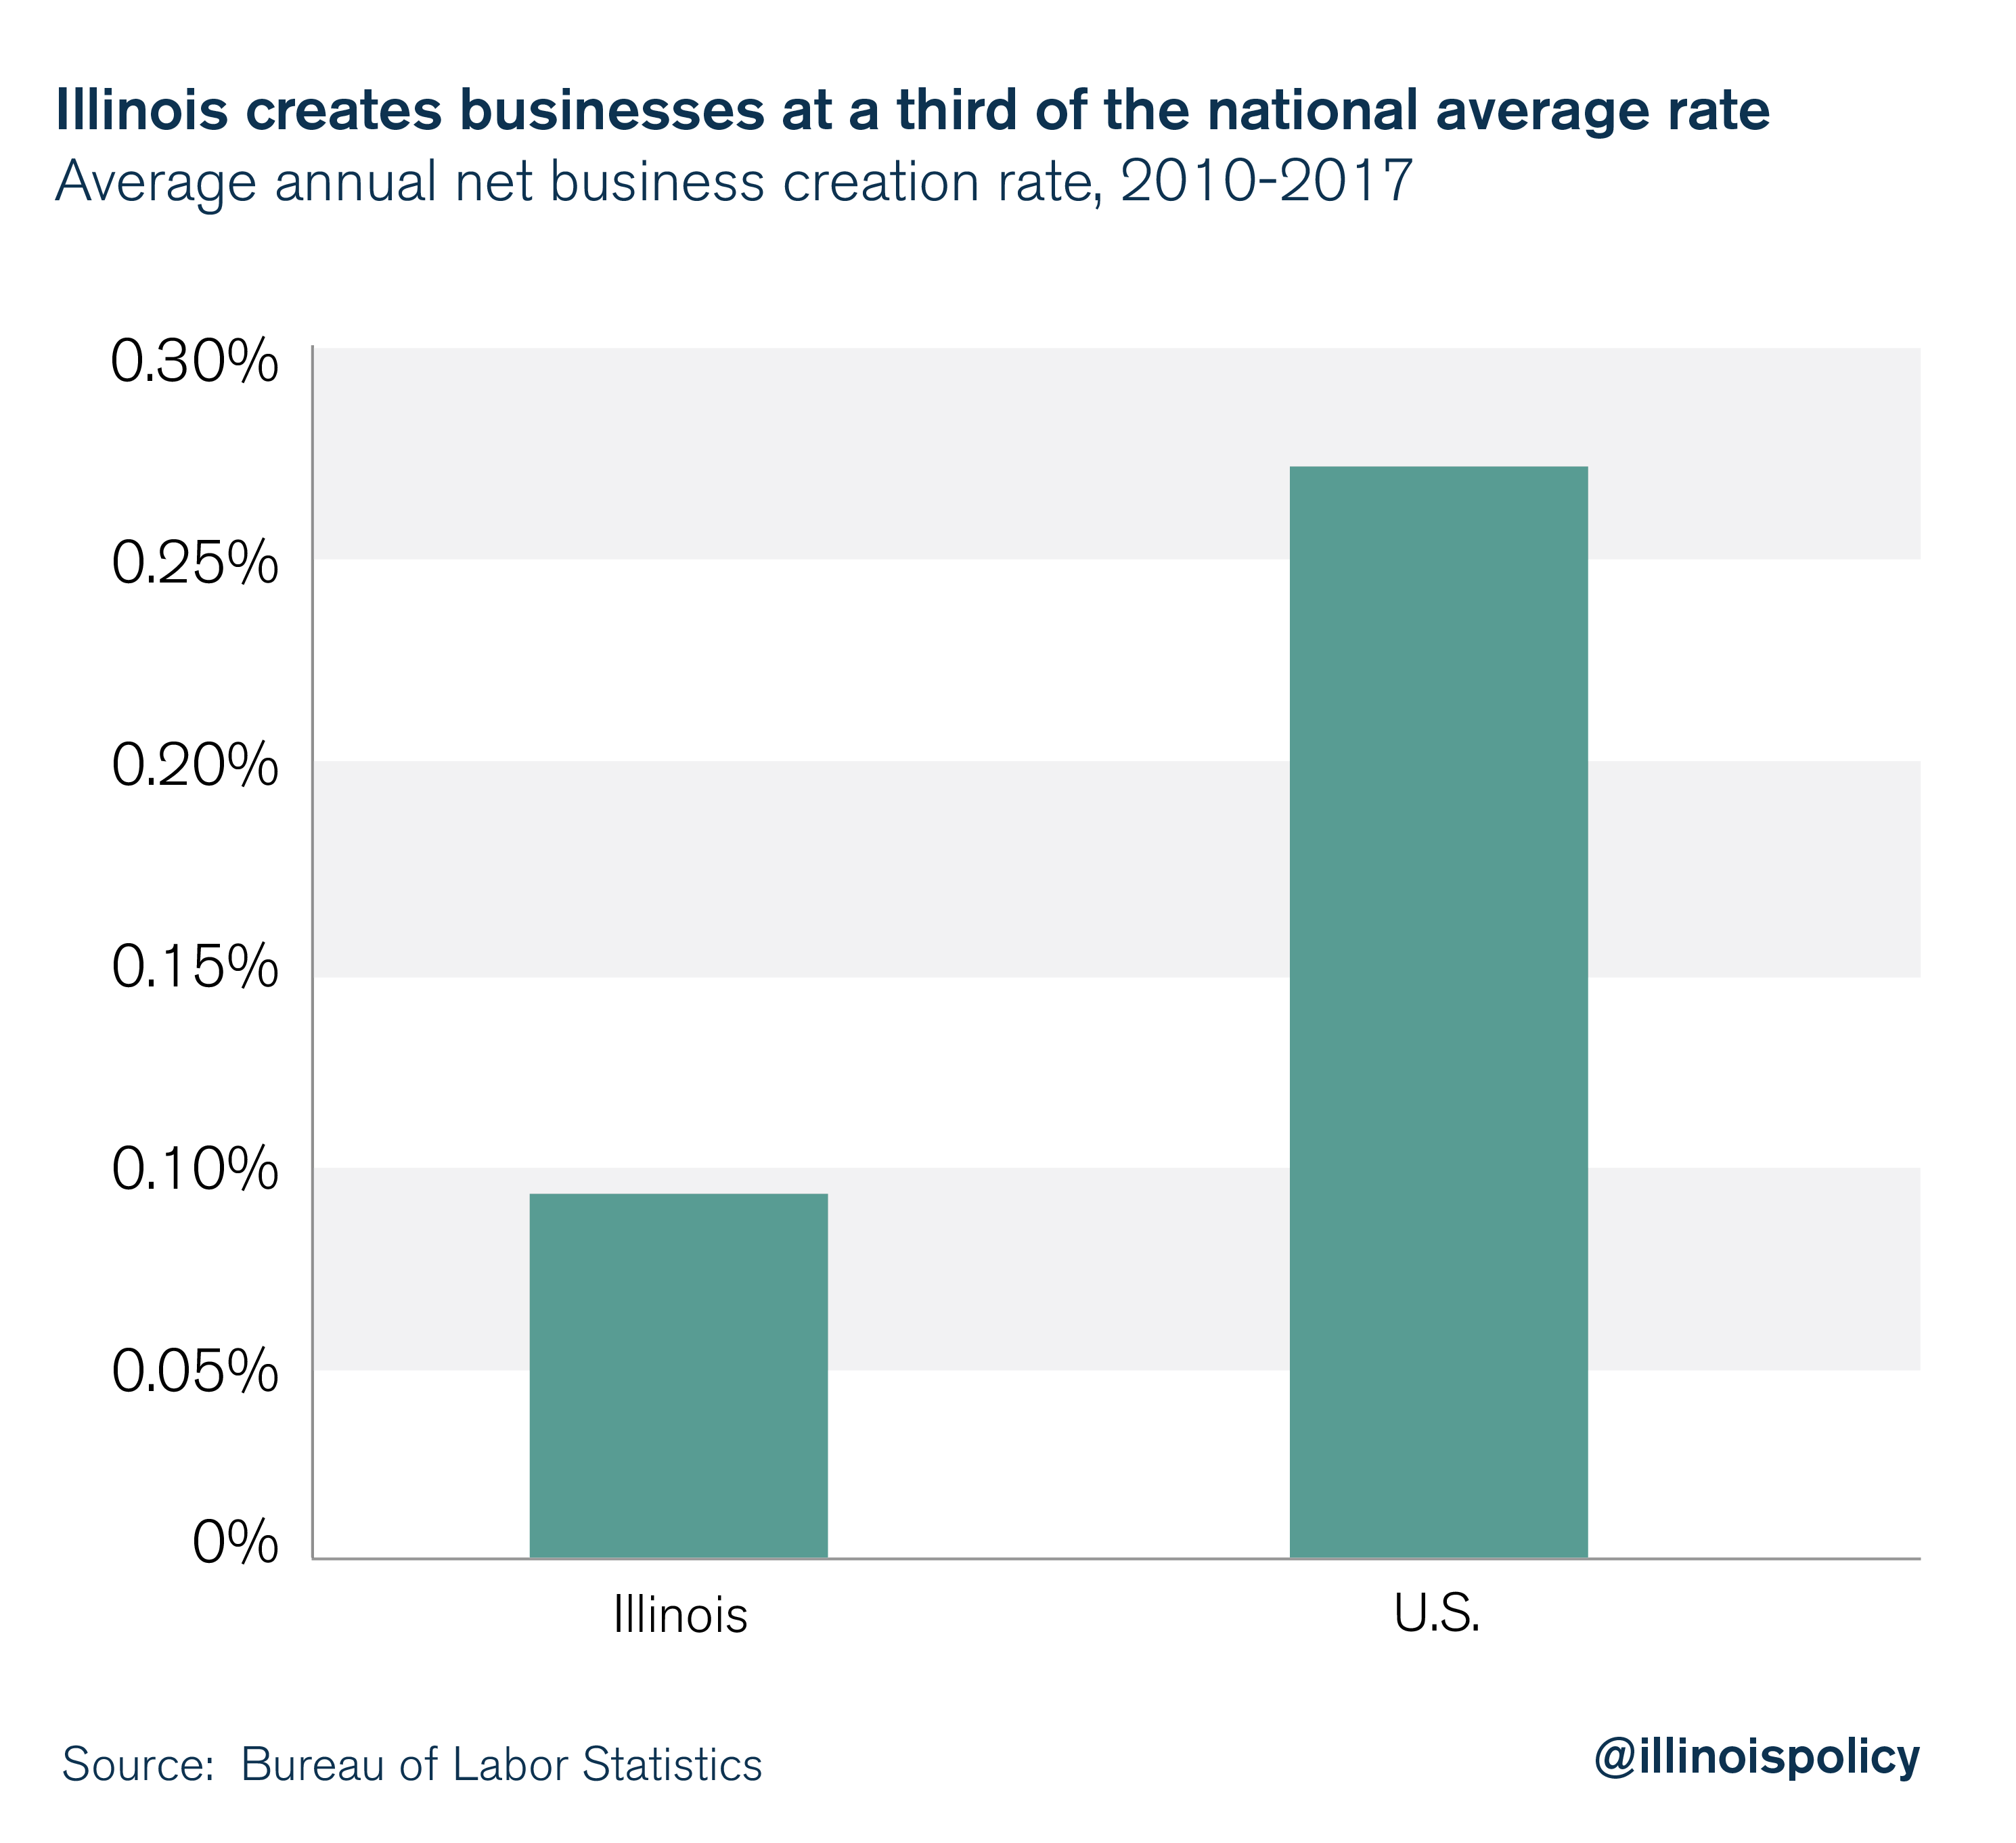 Illinois creates businesses at a third of the national rate